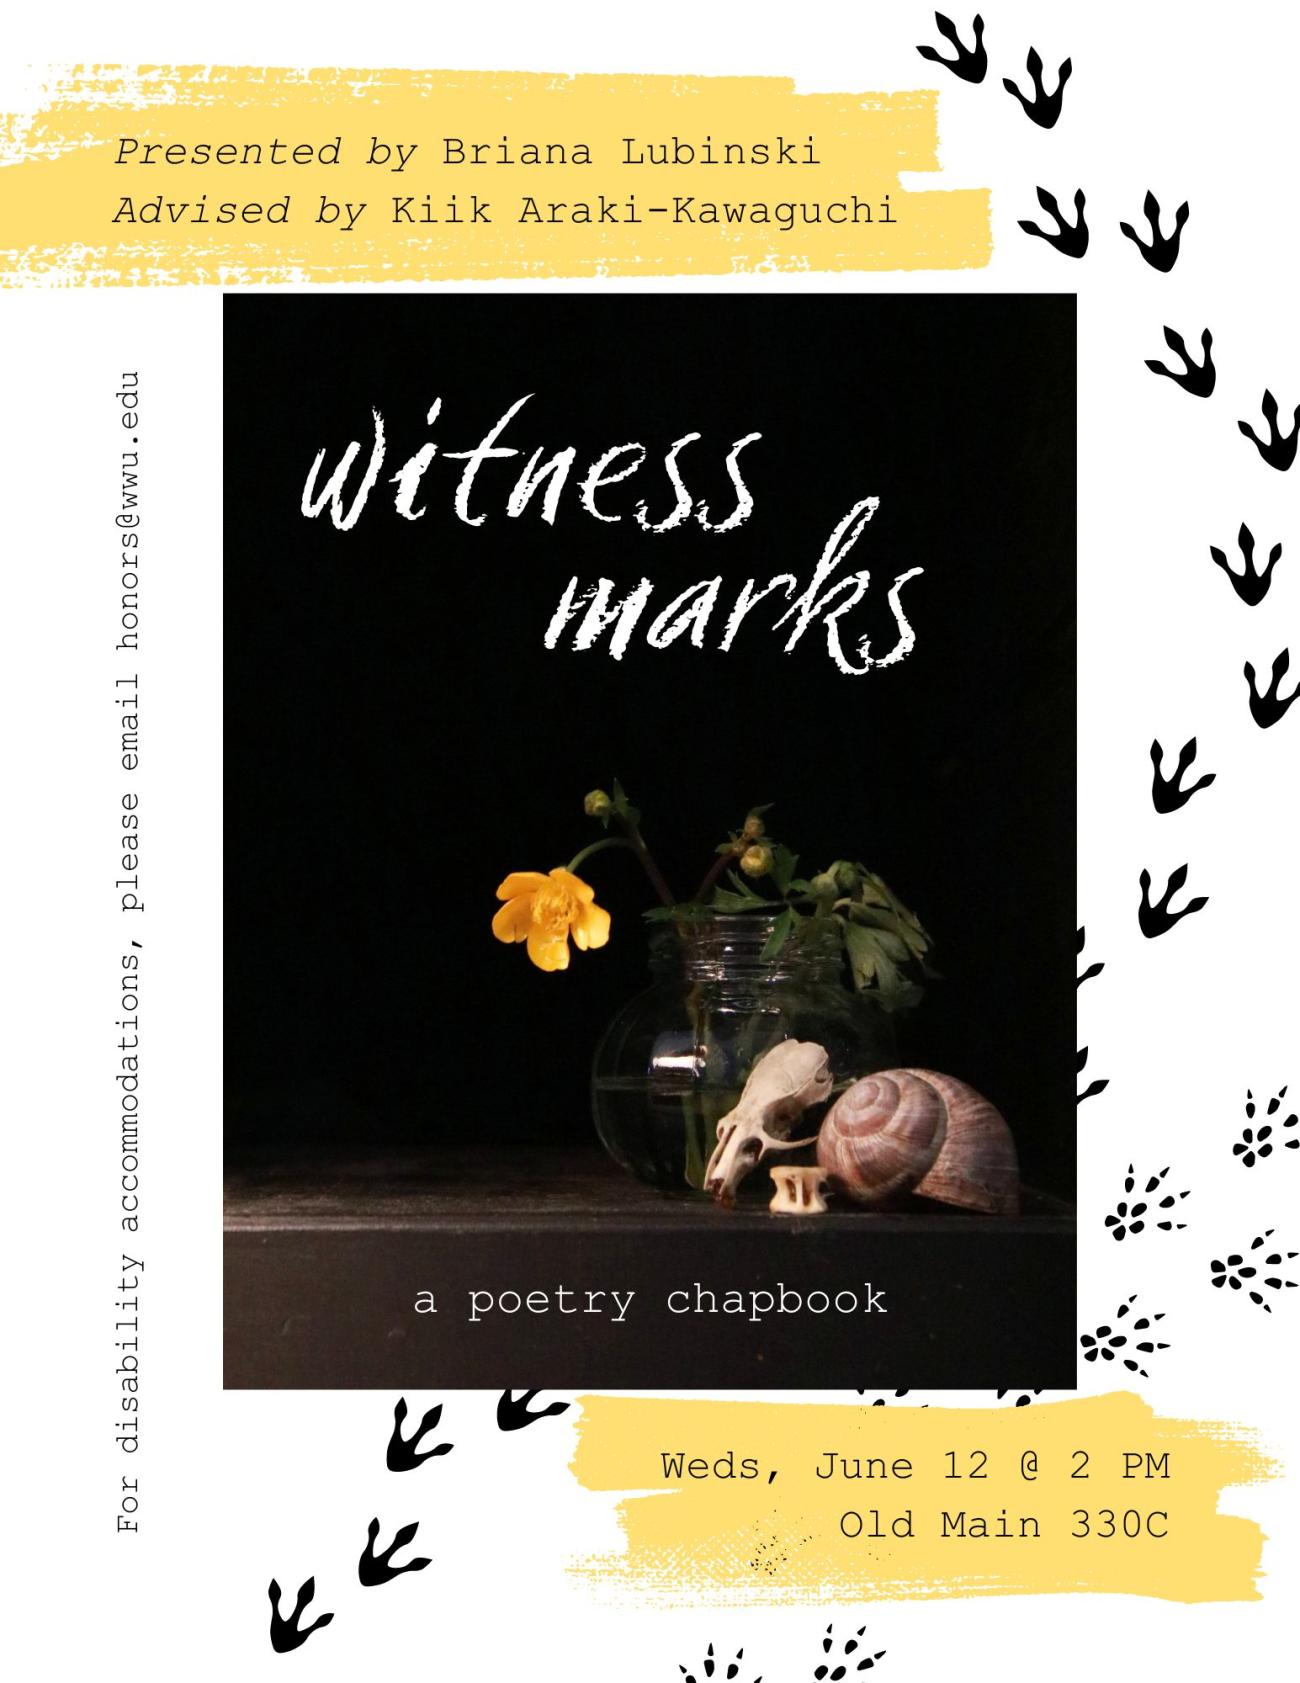 A white, black, and yellow poster with two sets of animal tracks. In the center, a black book cover shows a yellow flower in a glass jar, a snail shell, a rodent skull, and a snake bone. The text reads “witness marks. a poetry chapbook. Presented by Briana Lubinski. Advised by Kiik Araki-Kawaguchi. Weds, June 12 at 2 PM. Old Main 330C. For disability accommodations, please email honors@wwu.edu.”